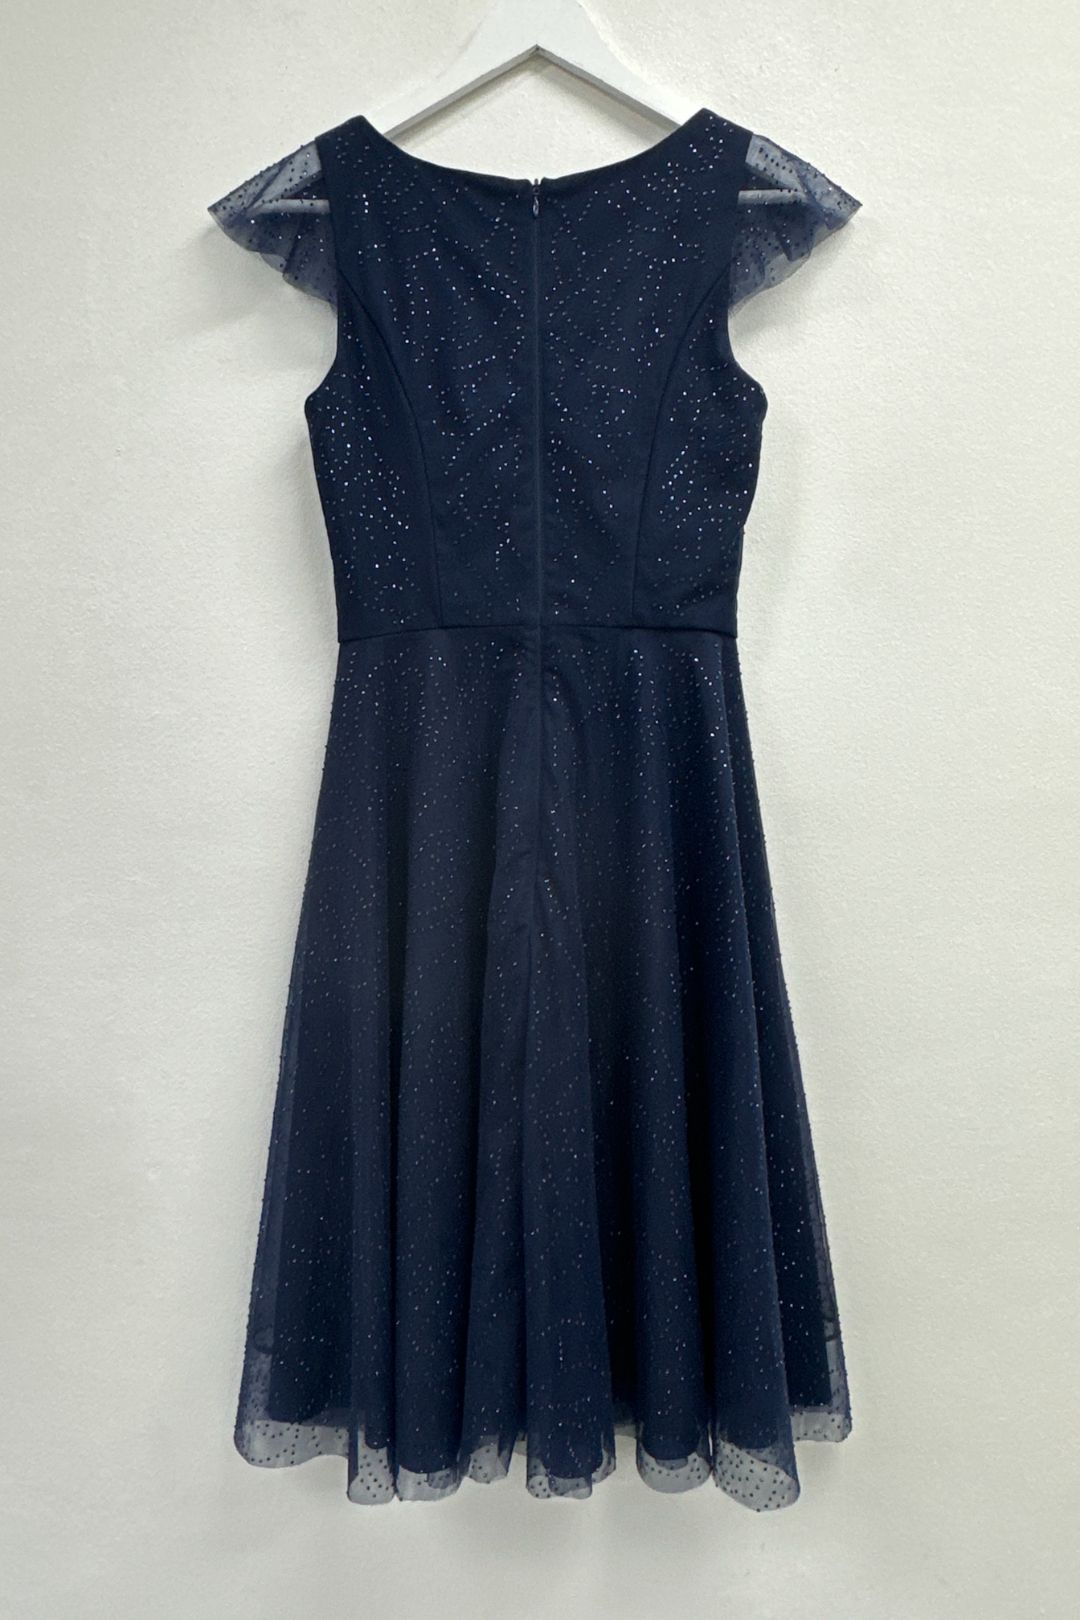 Review Raindrop on Roses Dress in Navy